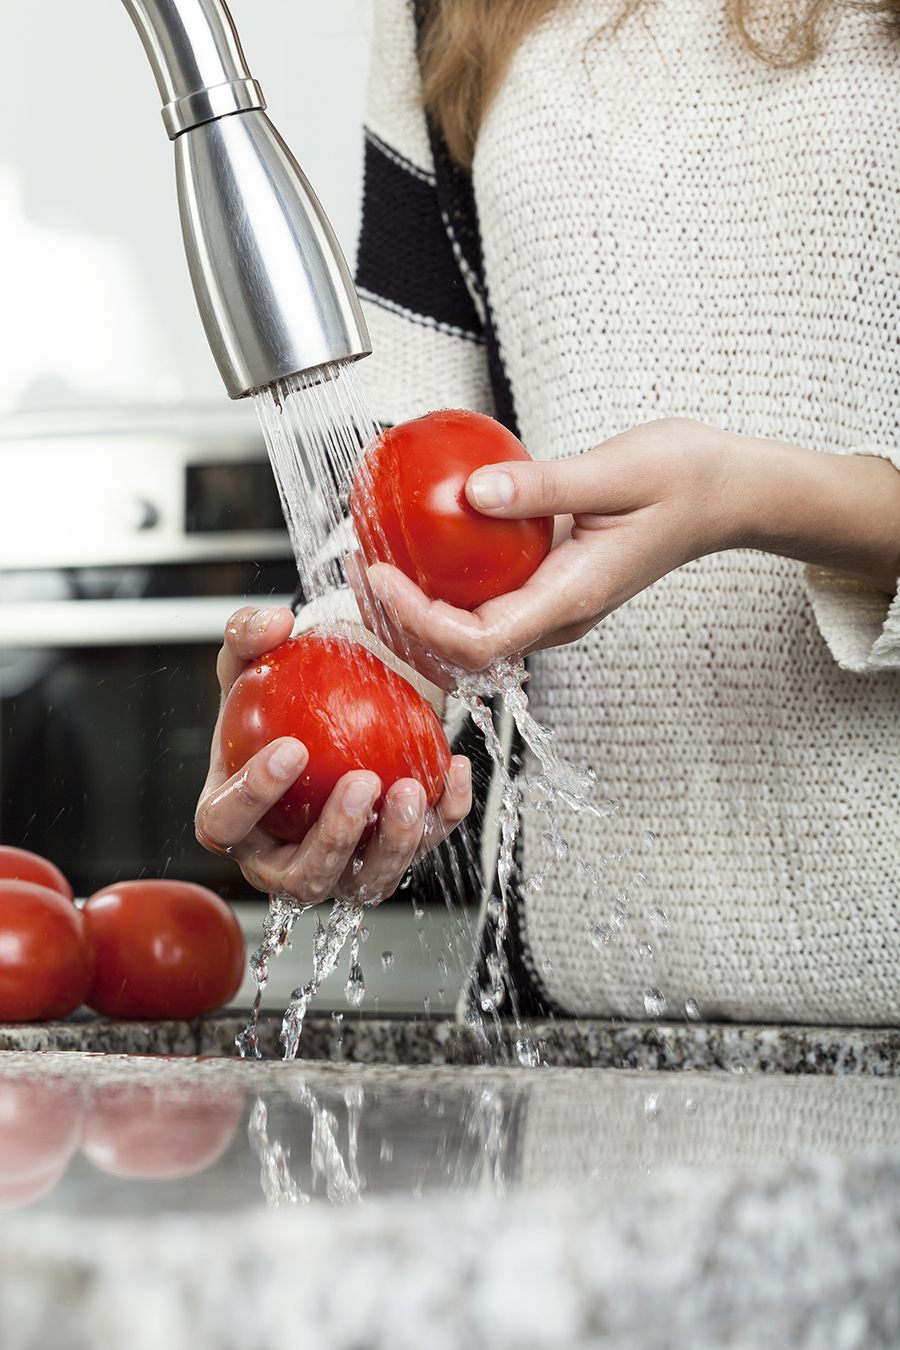 Washing tomatoes under the tap